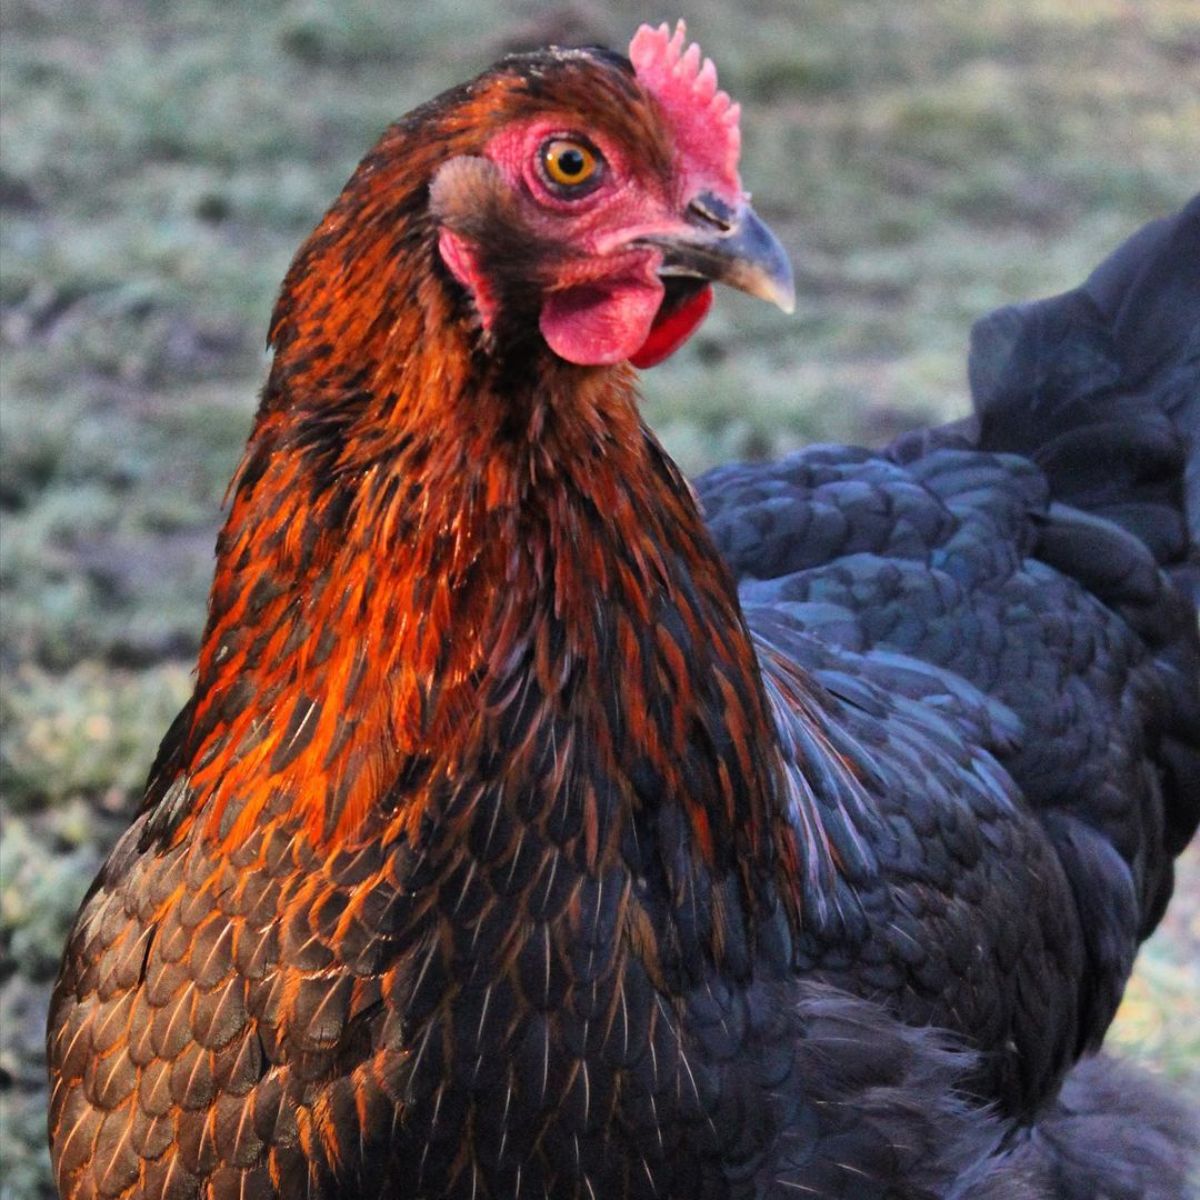 A close-up of a beautiful Burford Brown hen.